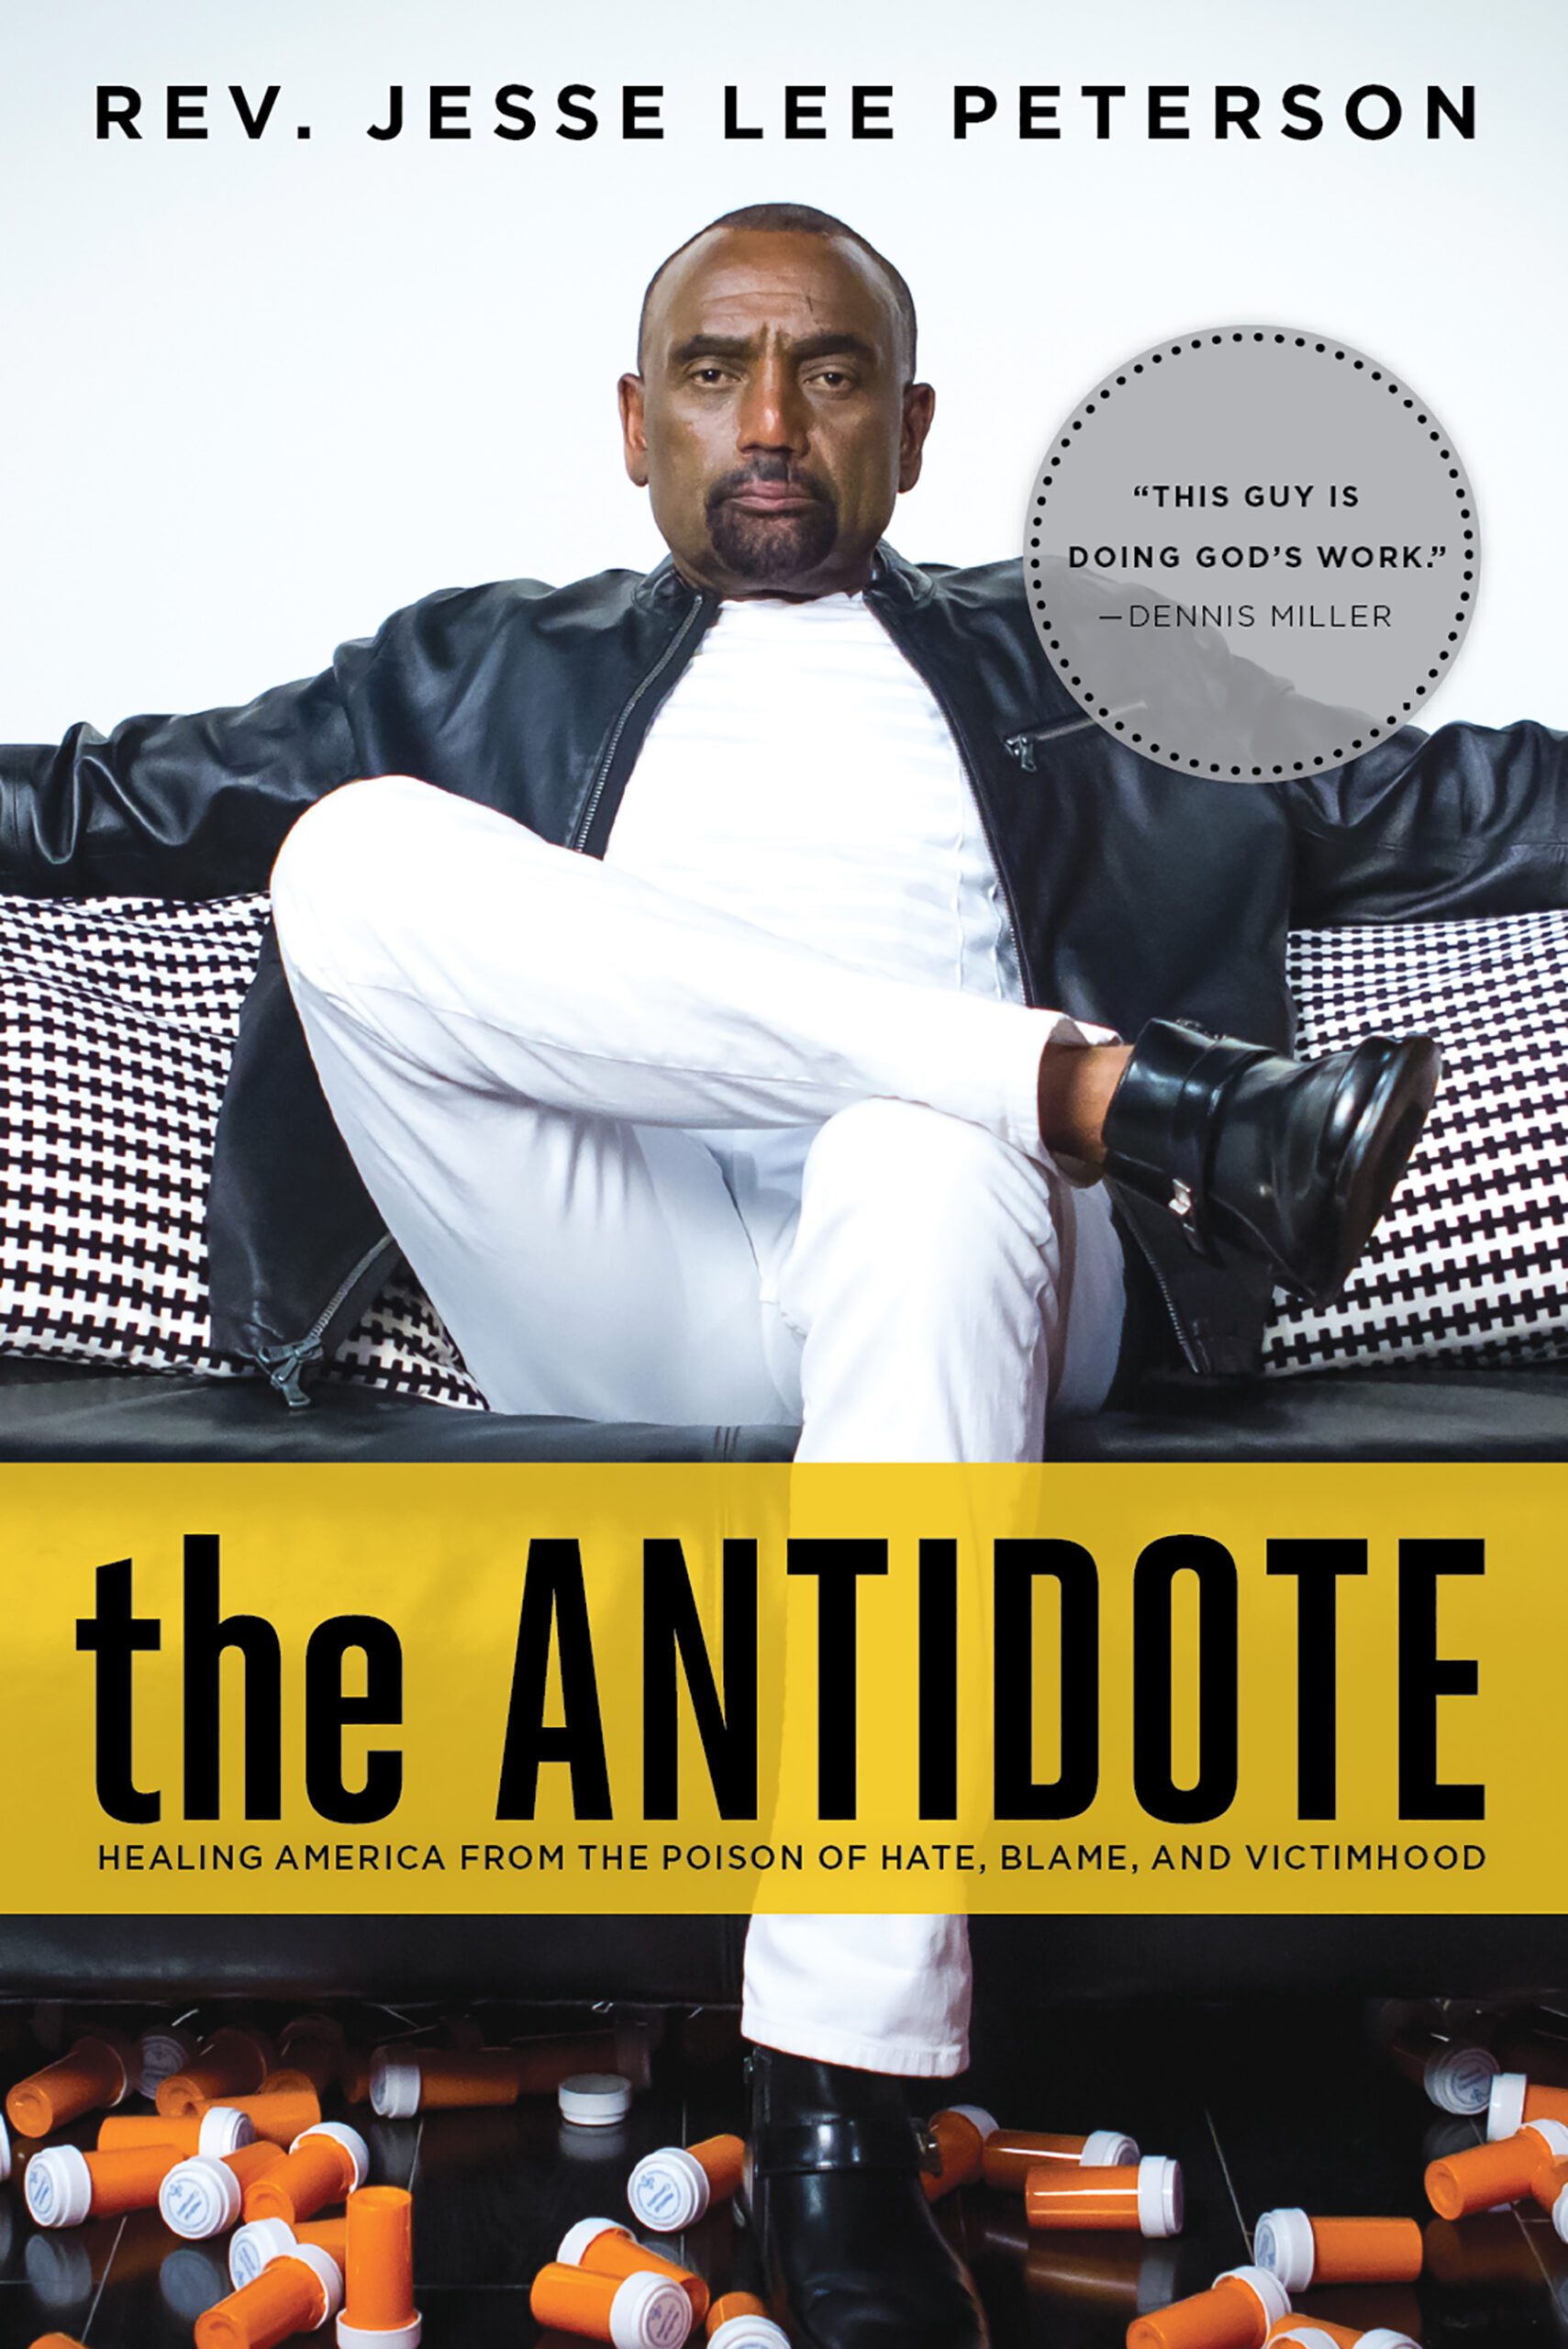 The Antidote by Rev. Jesse Lee Peterson